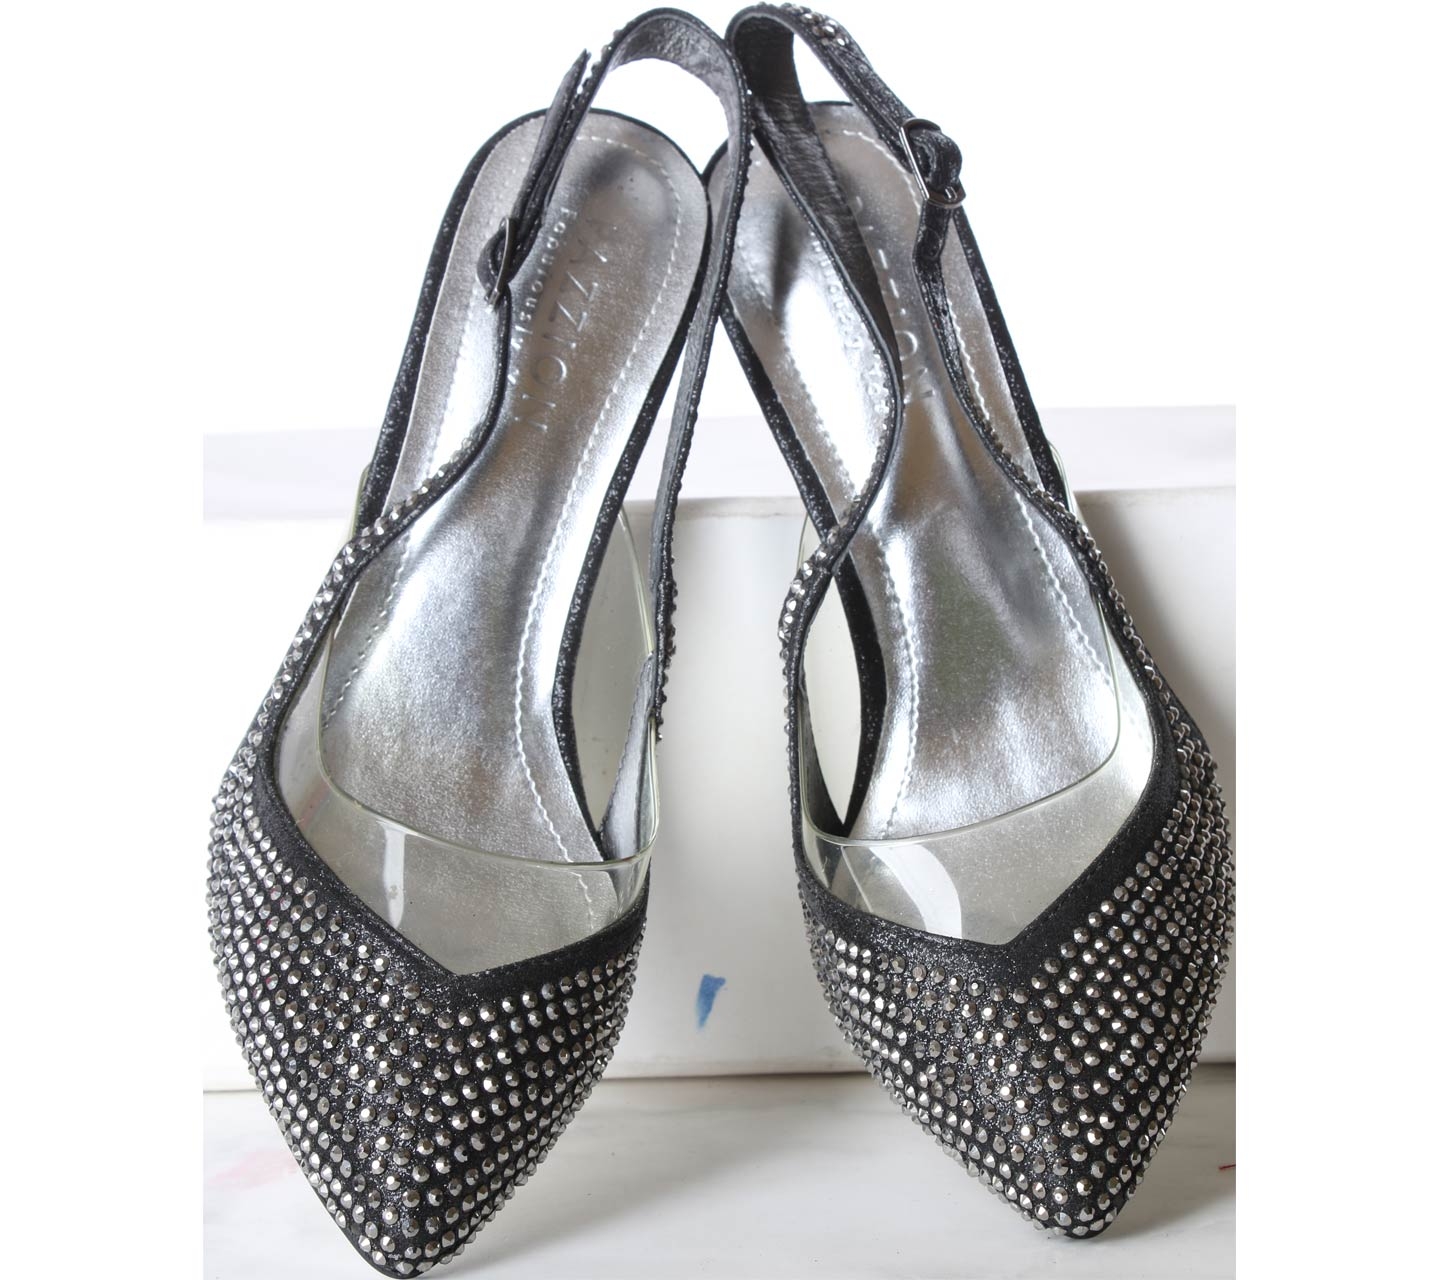 Pazzion Black Perforated Heels